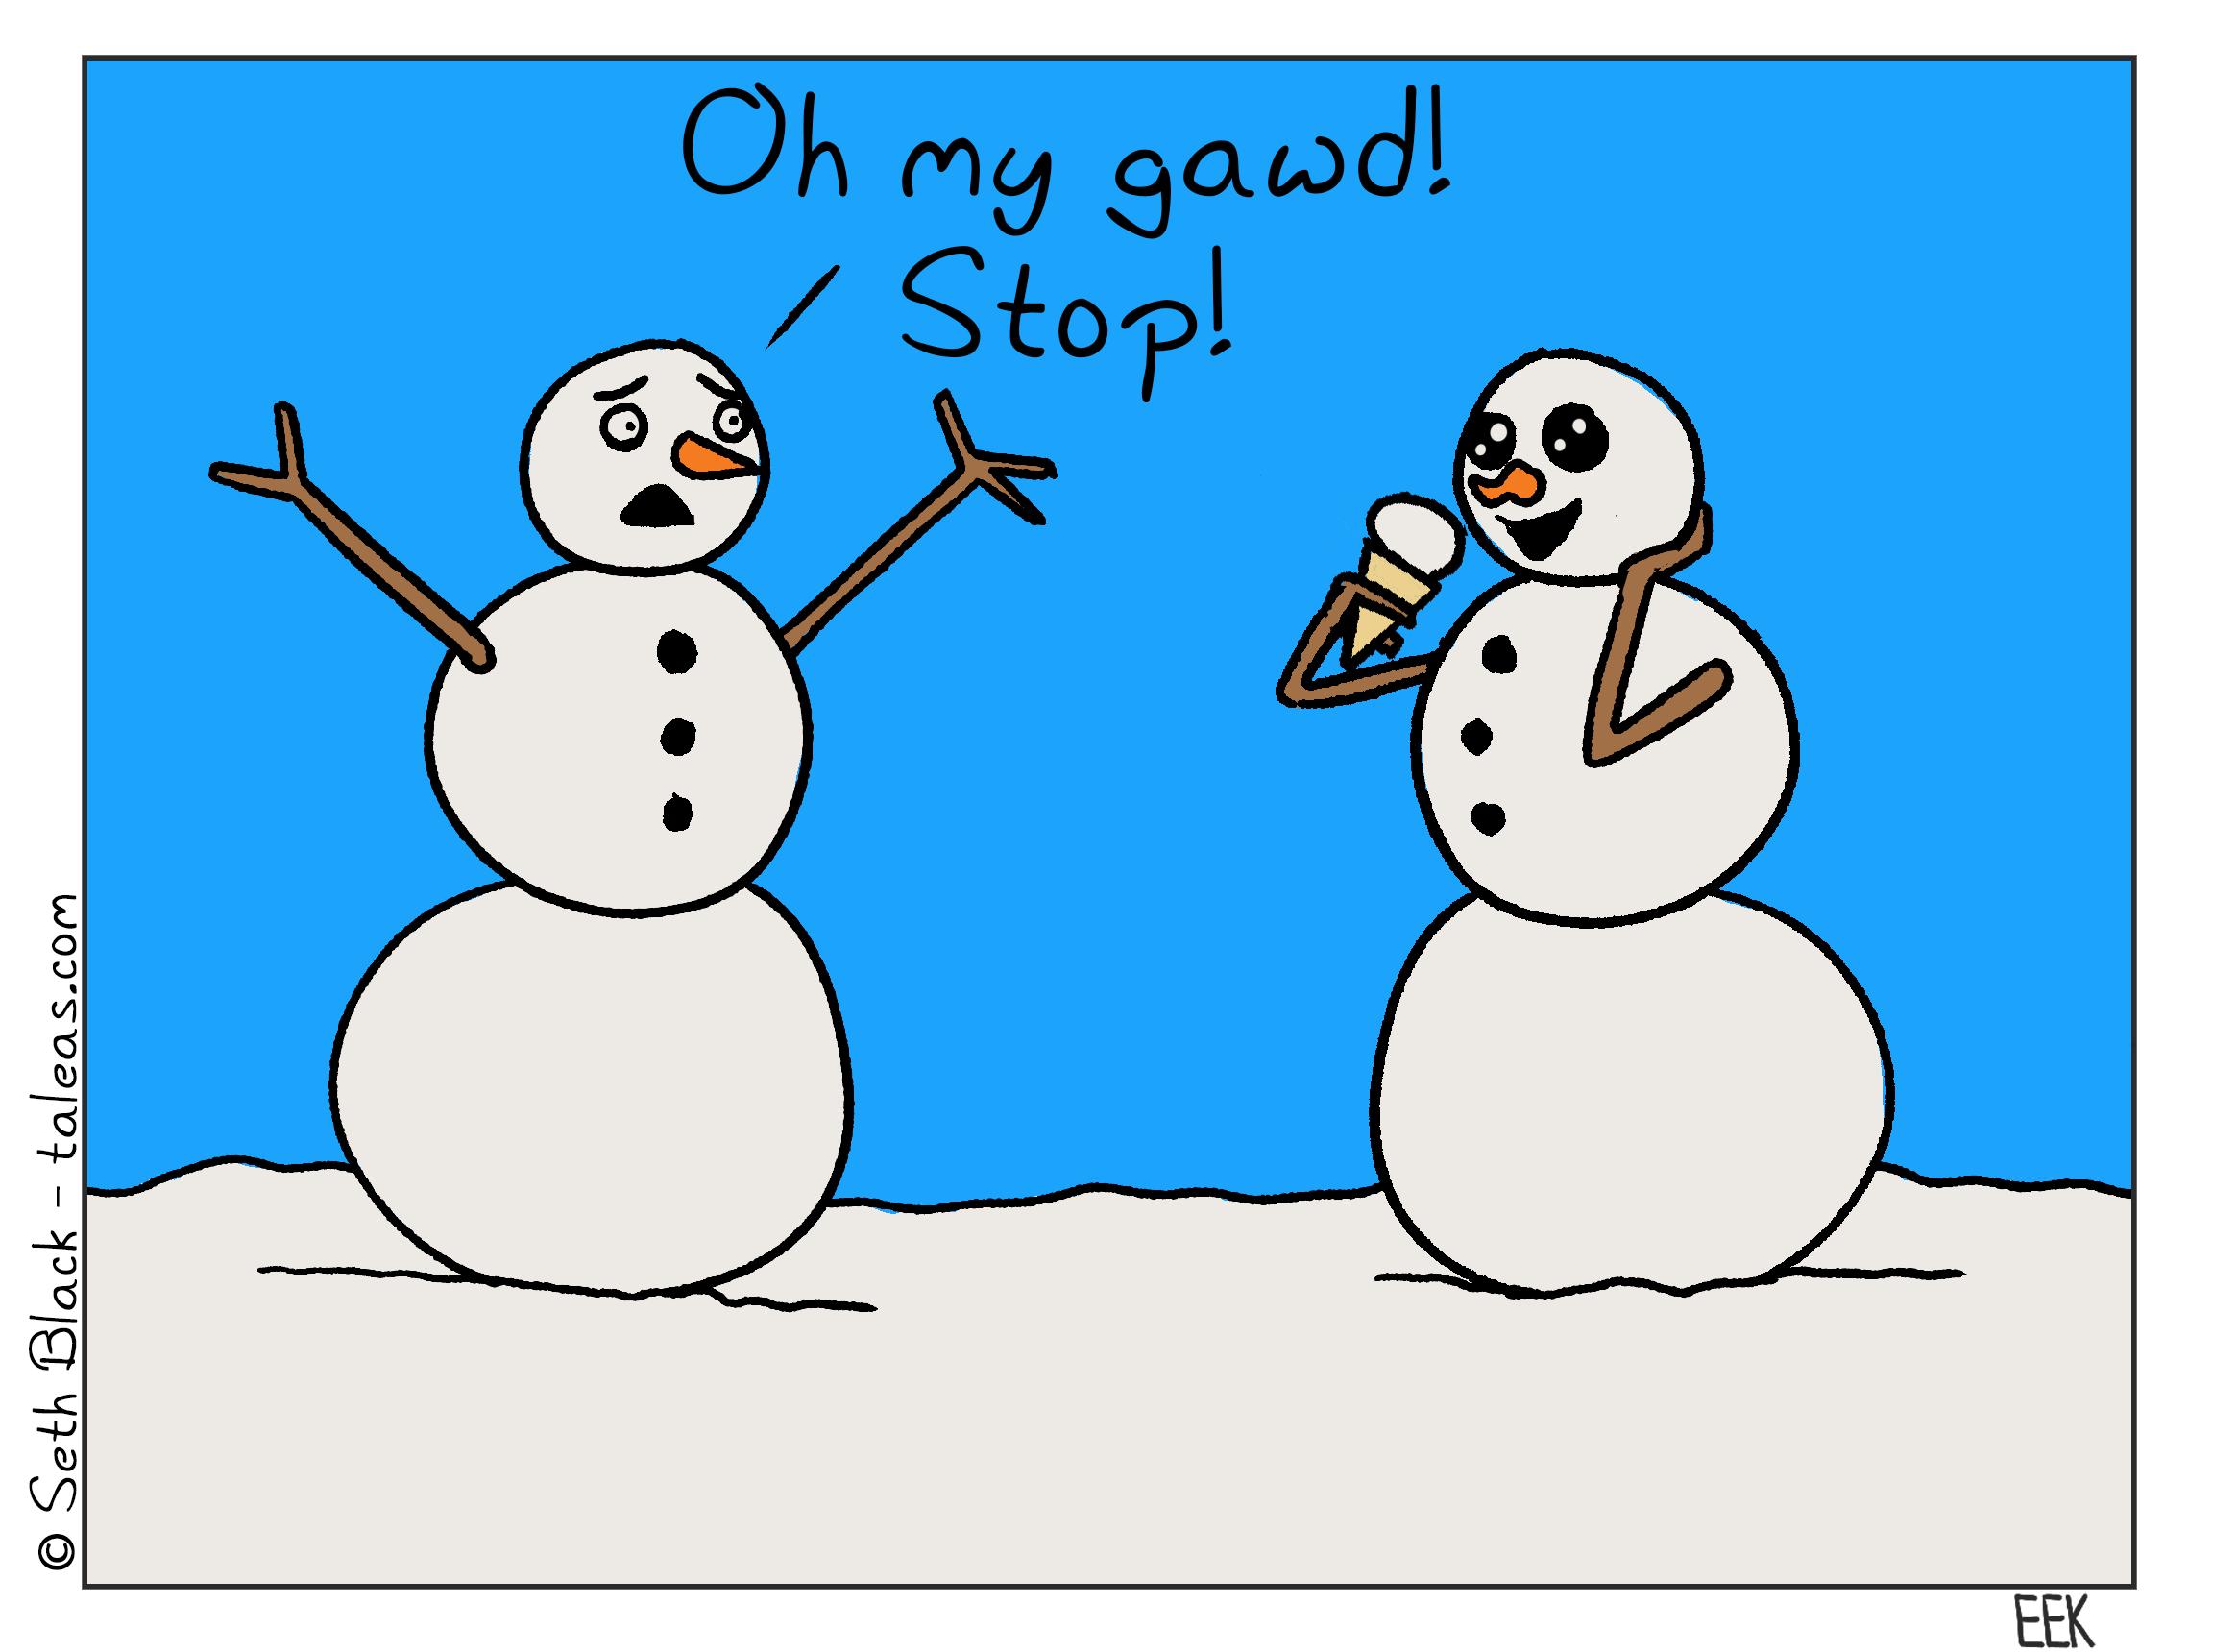 A snowman looks excitedly about to take a bite out of a snow cone, to which another exclaims, "Oh my gawd! Stop!"